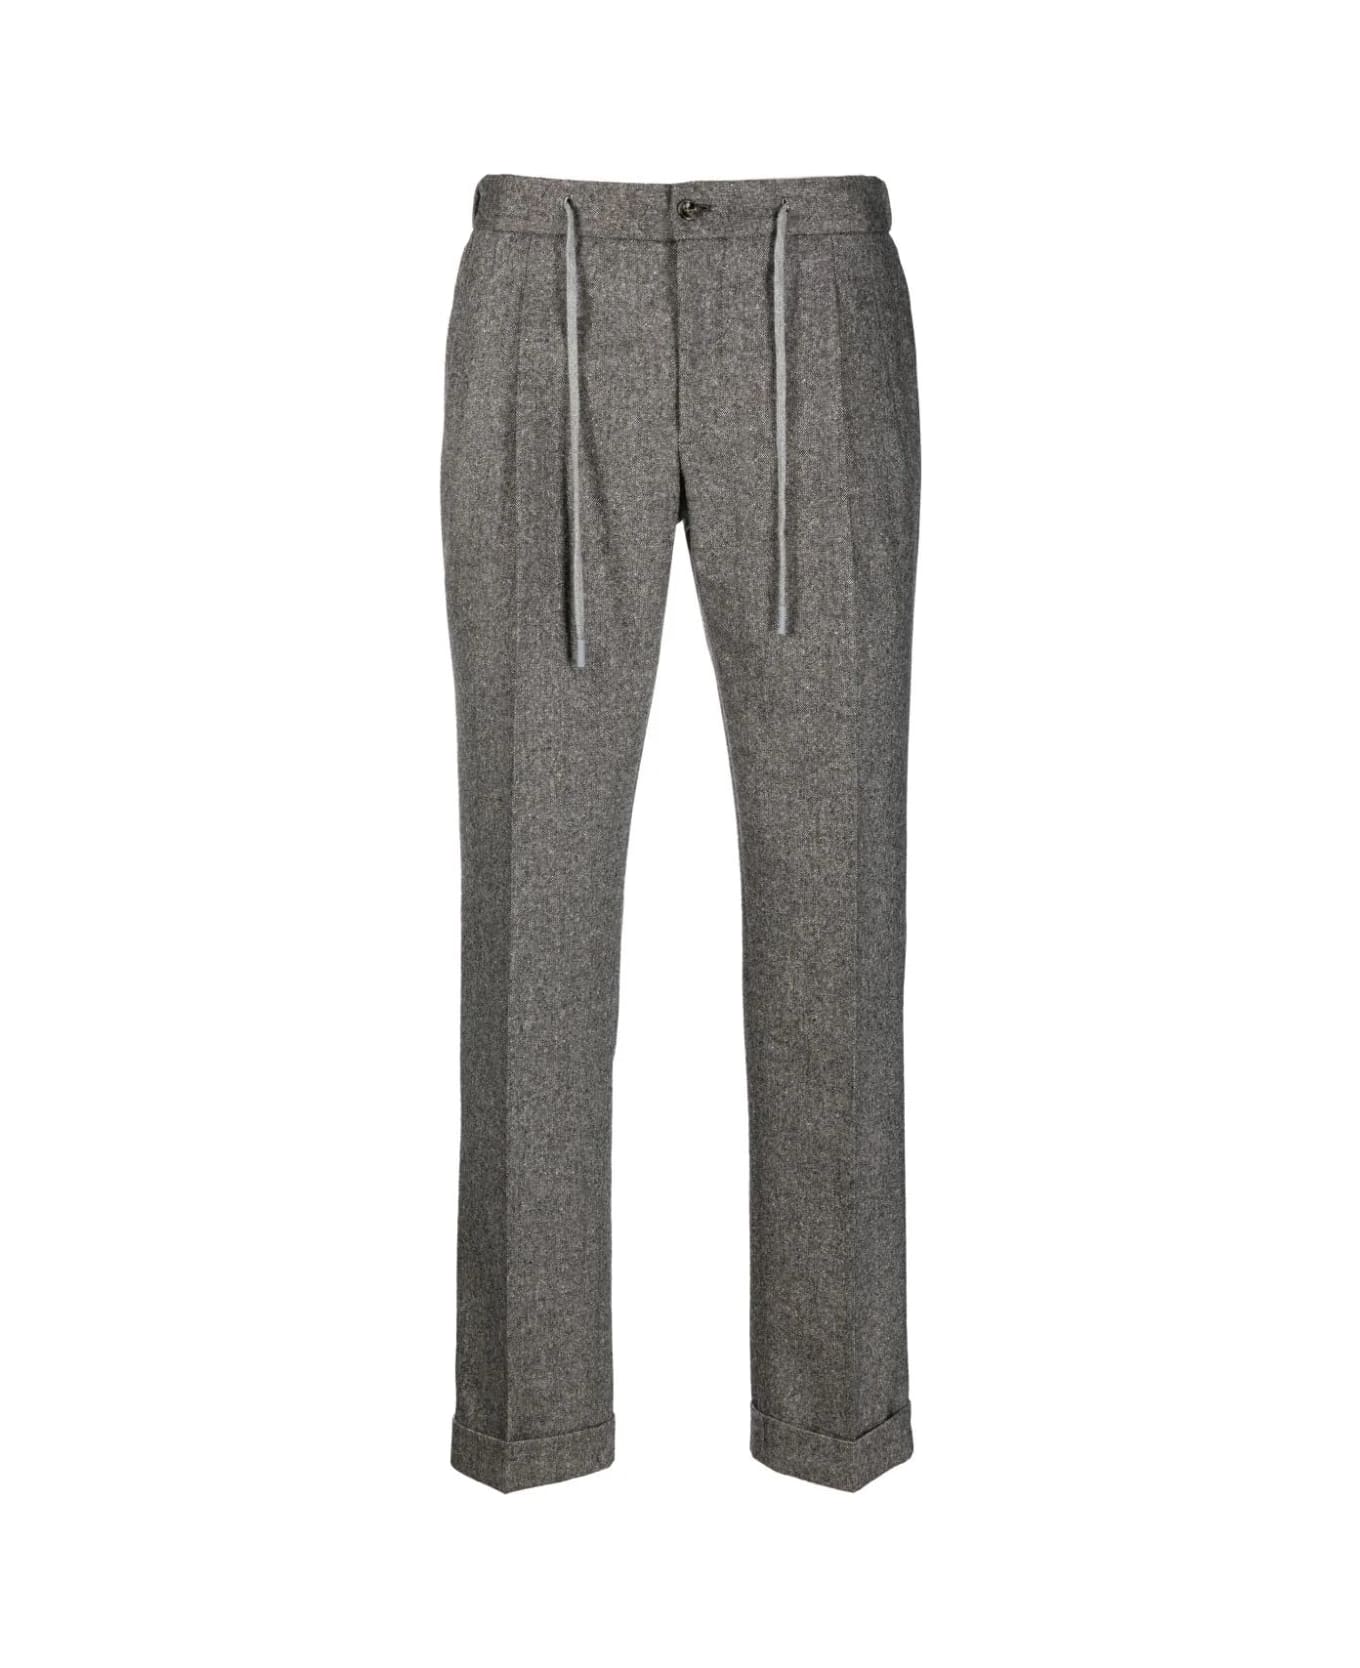 Barba Napoli Roma Coulisse Trousers - Tweed ボトムス